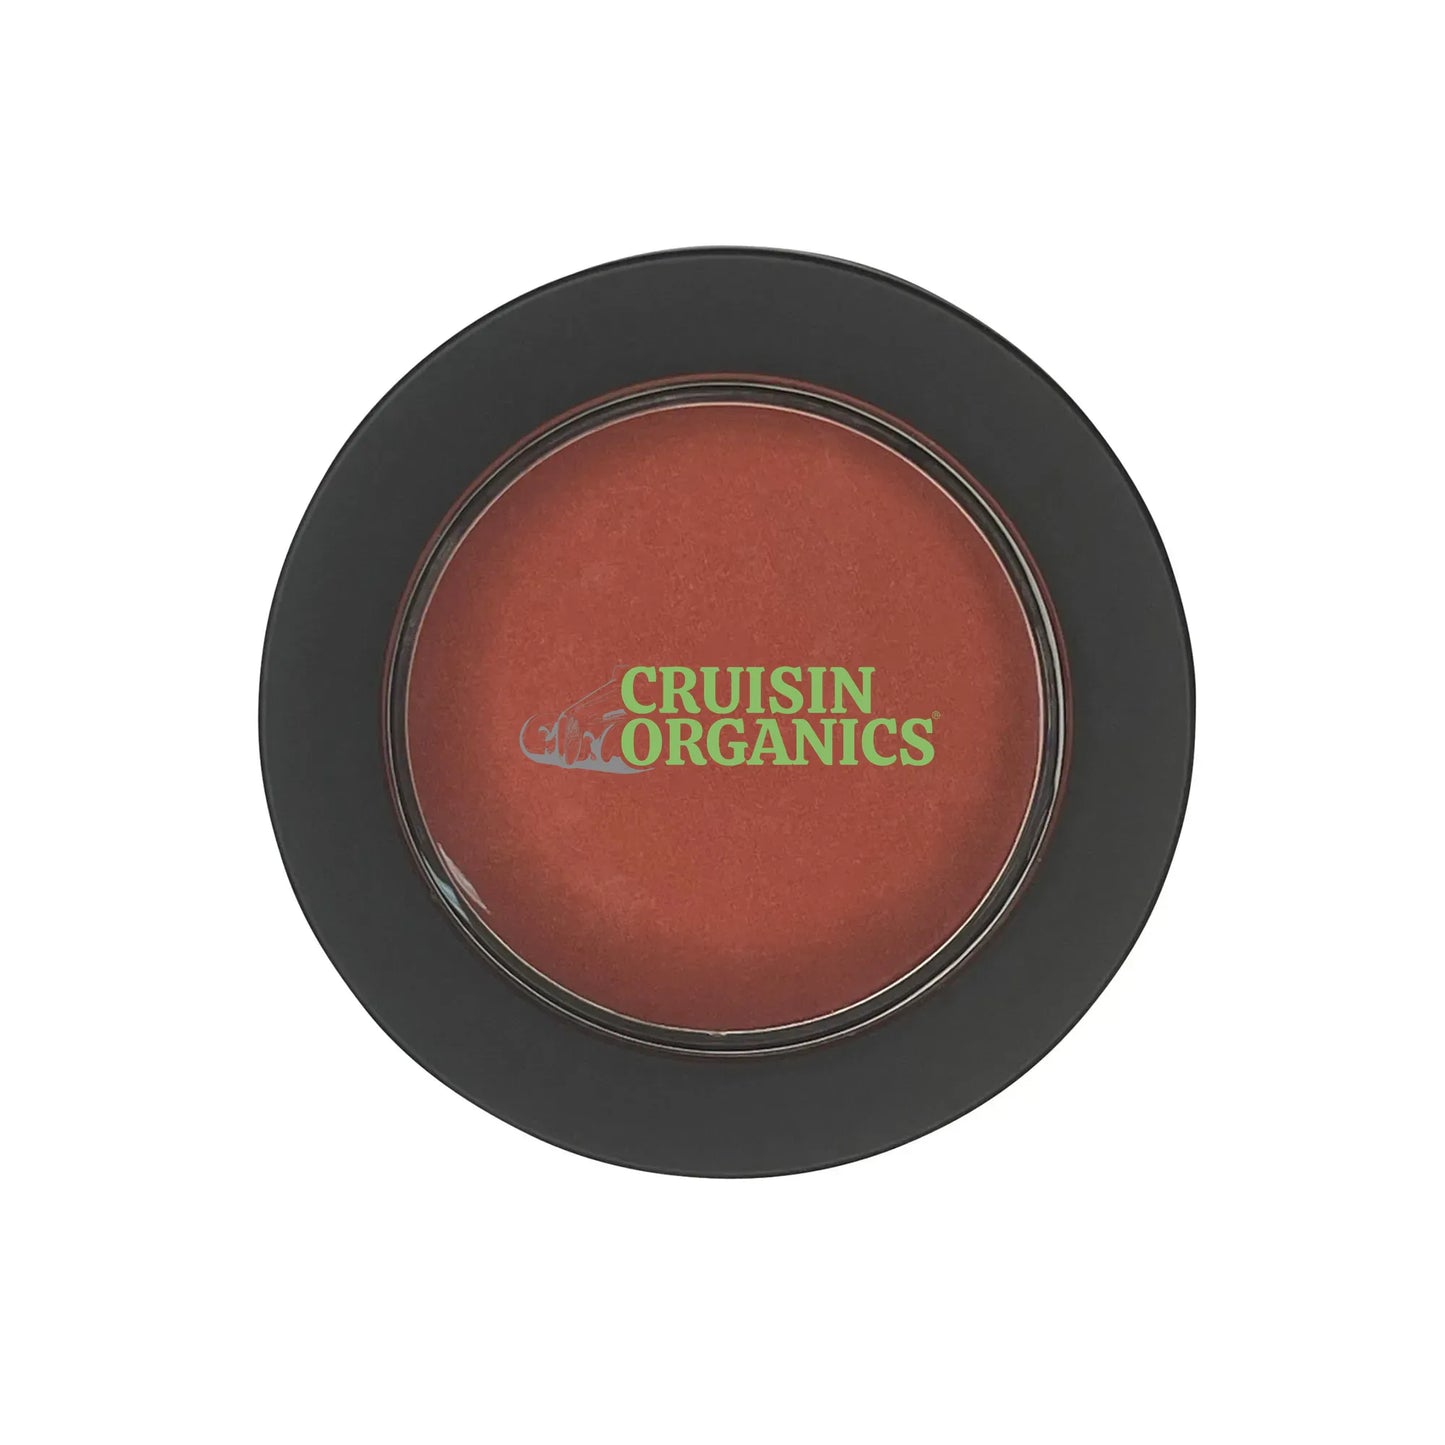 Get a healthy, natural glow with Cruisin Organics Single Pan Blush. No harsh chemicals or additives, just beautiful shades of rosy red.